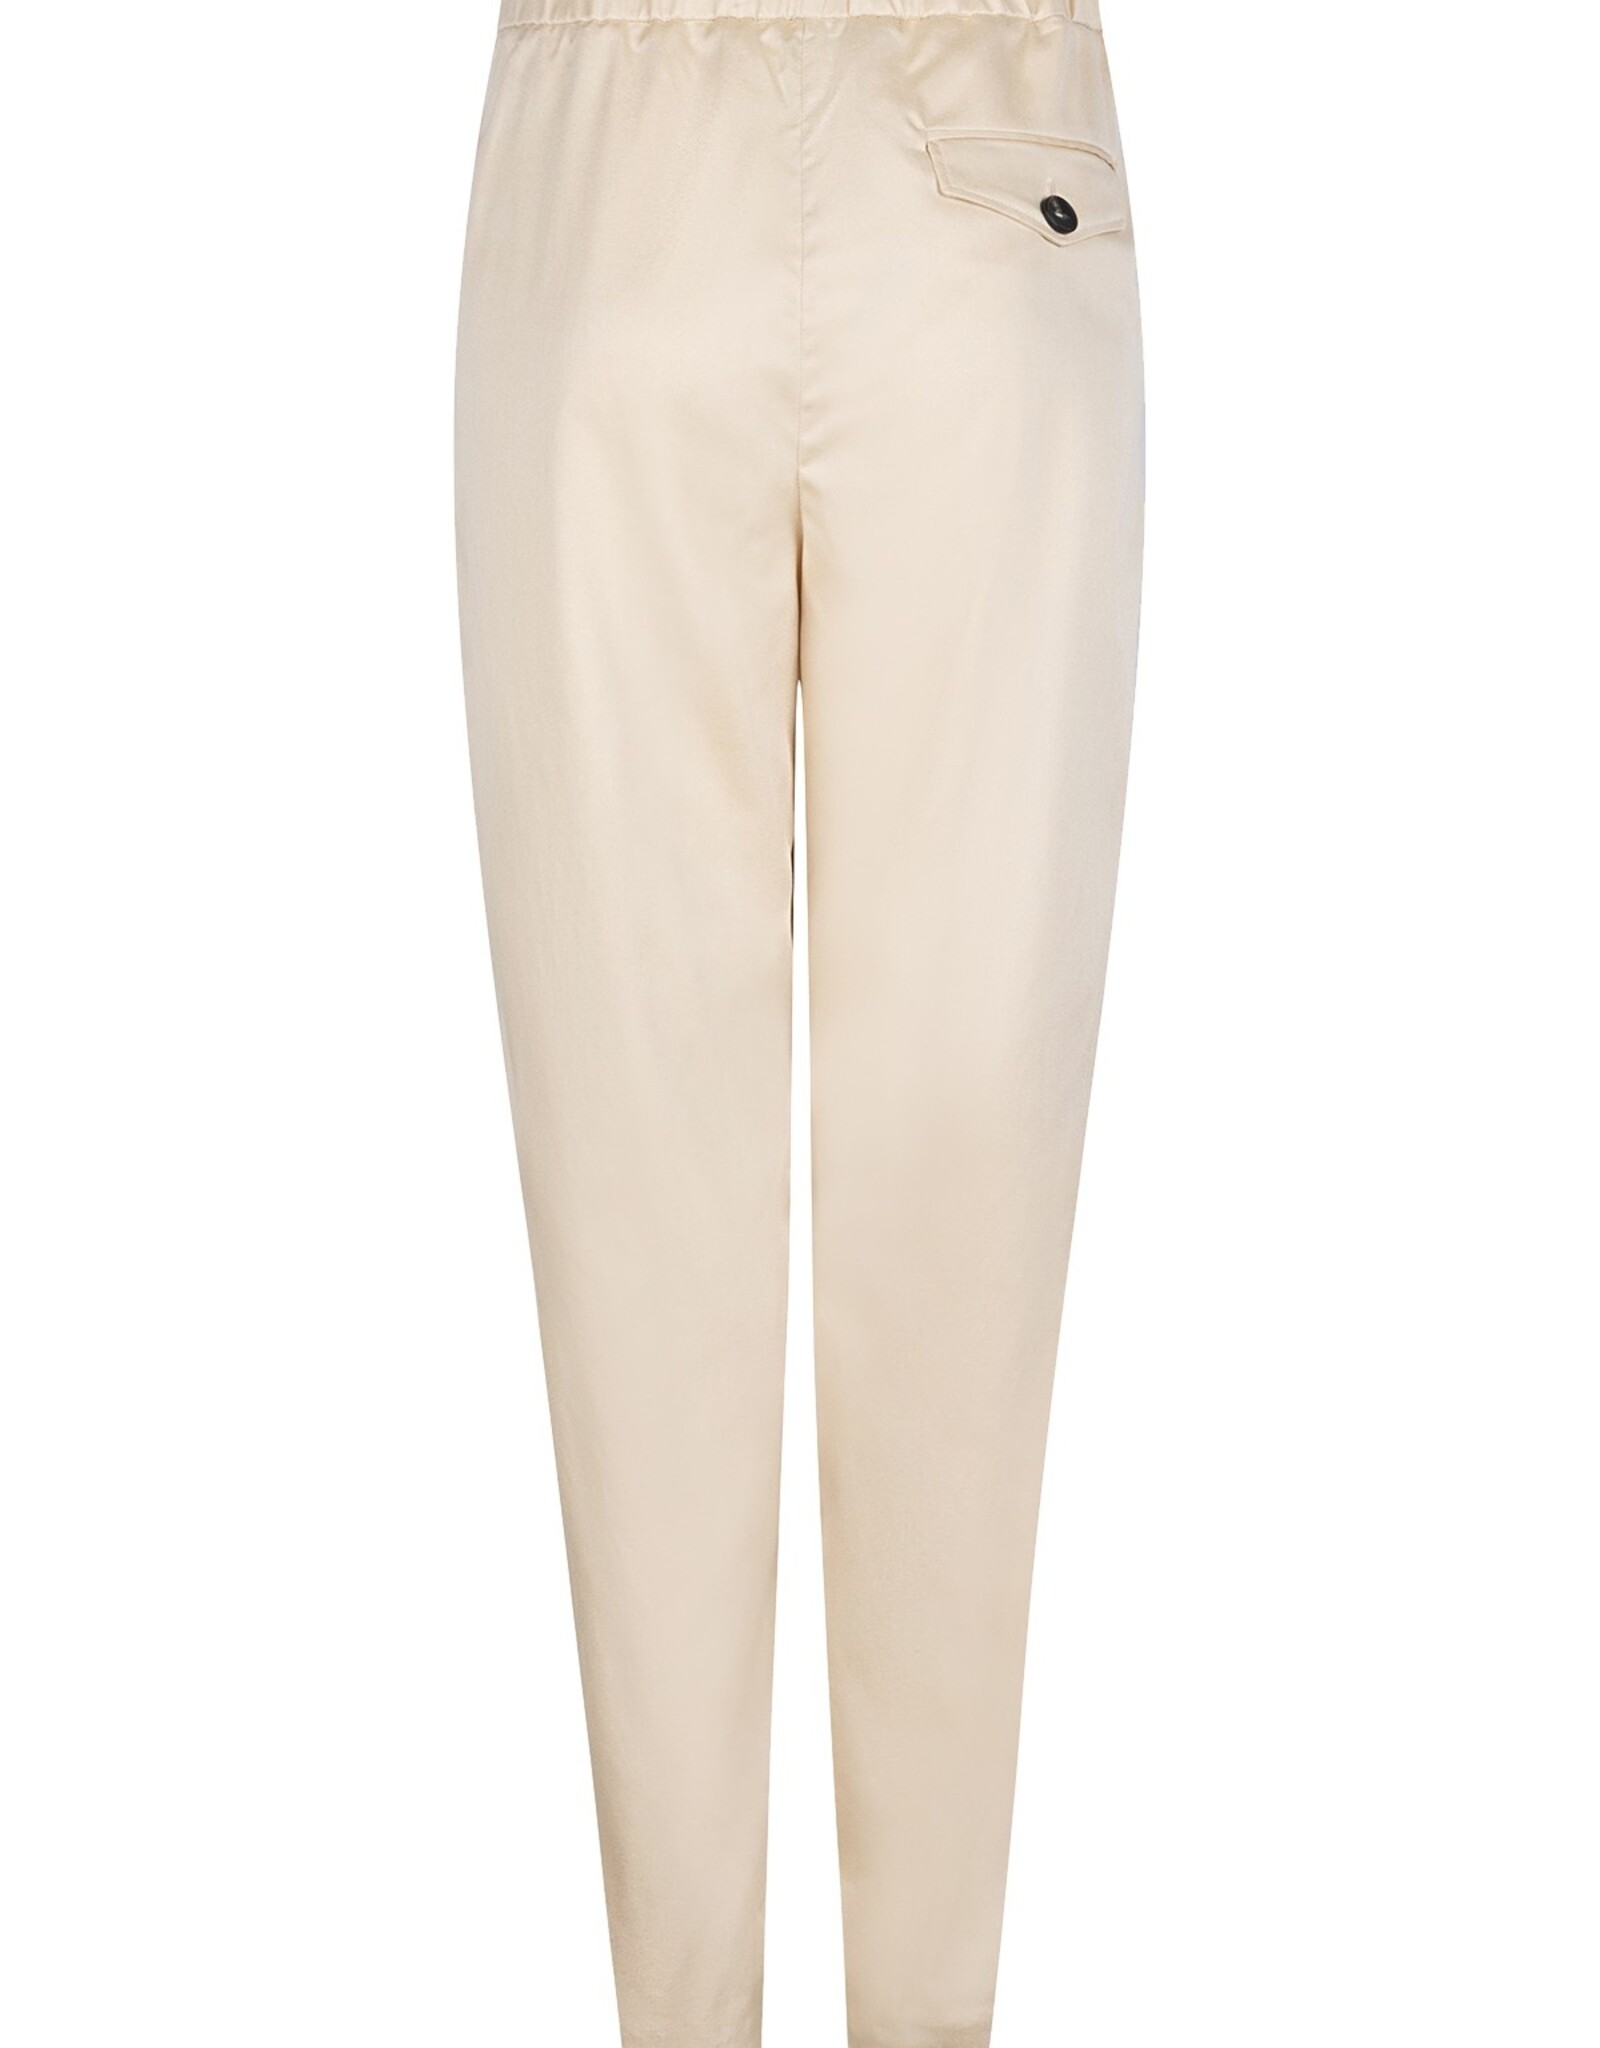 Ruby Tuesday RAFINA relaxed pants with elastic at backside waistband Transparant yellow